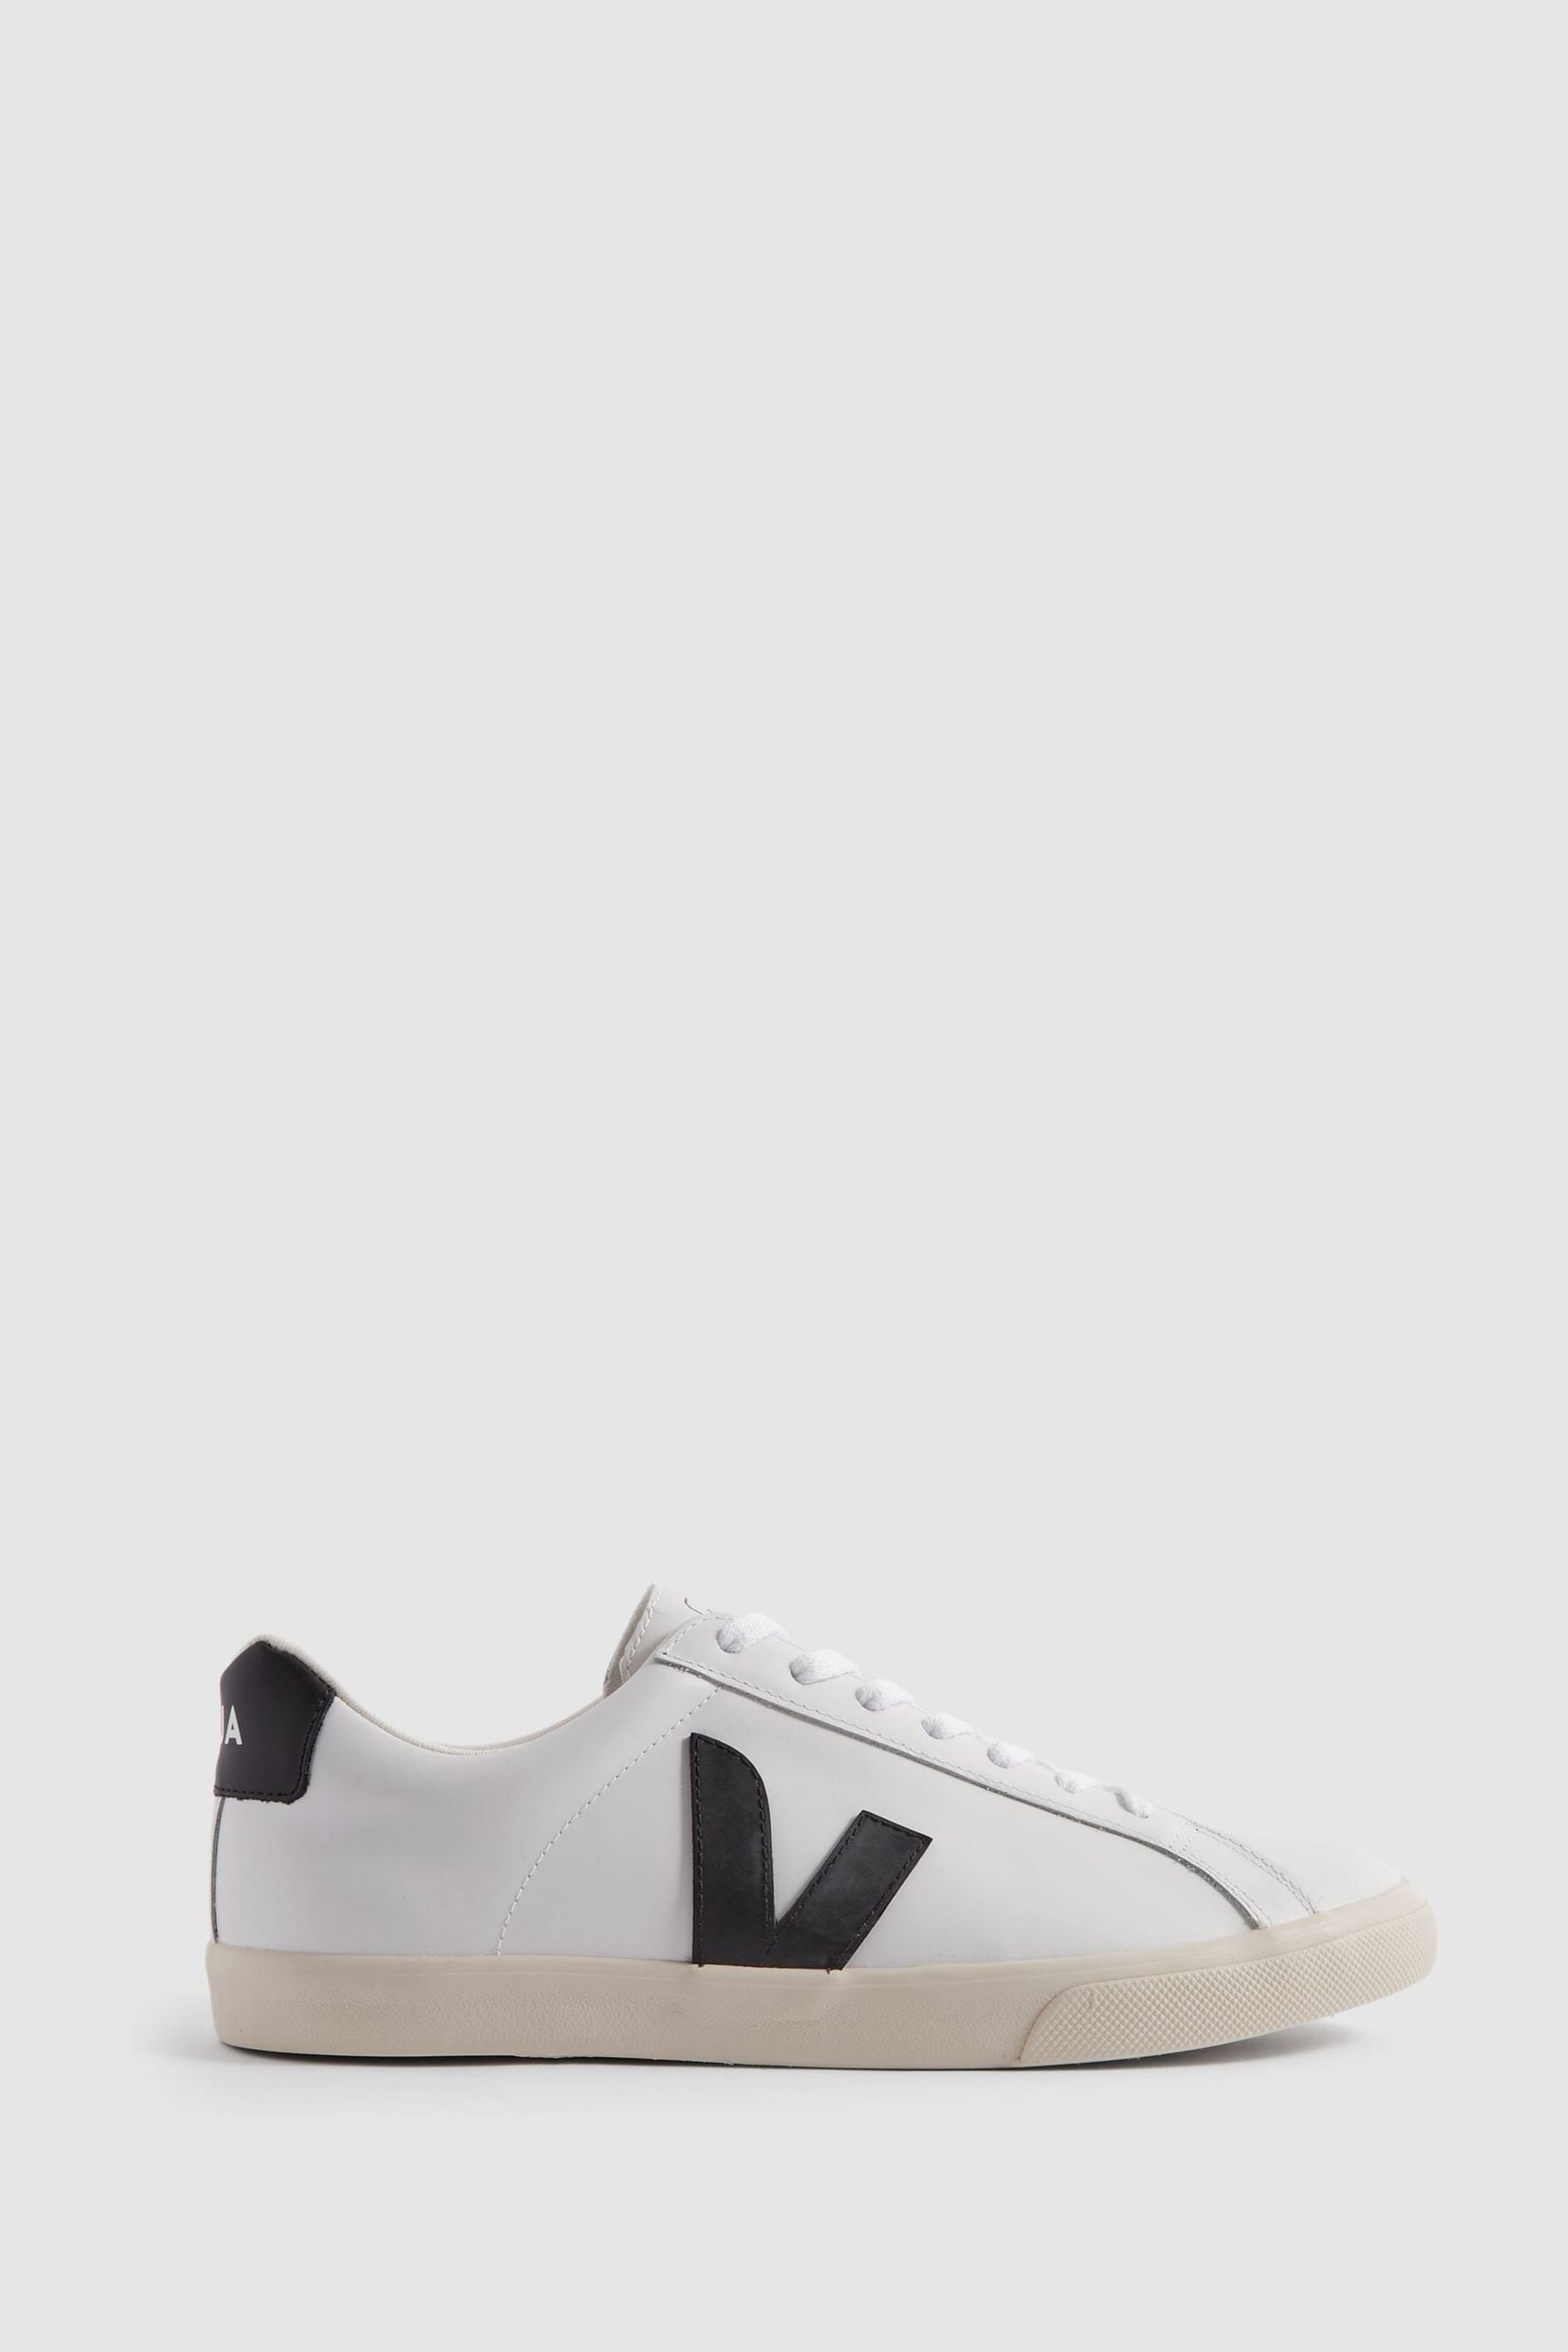 Veja Leather Trainers In Extra White Black